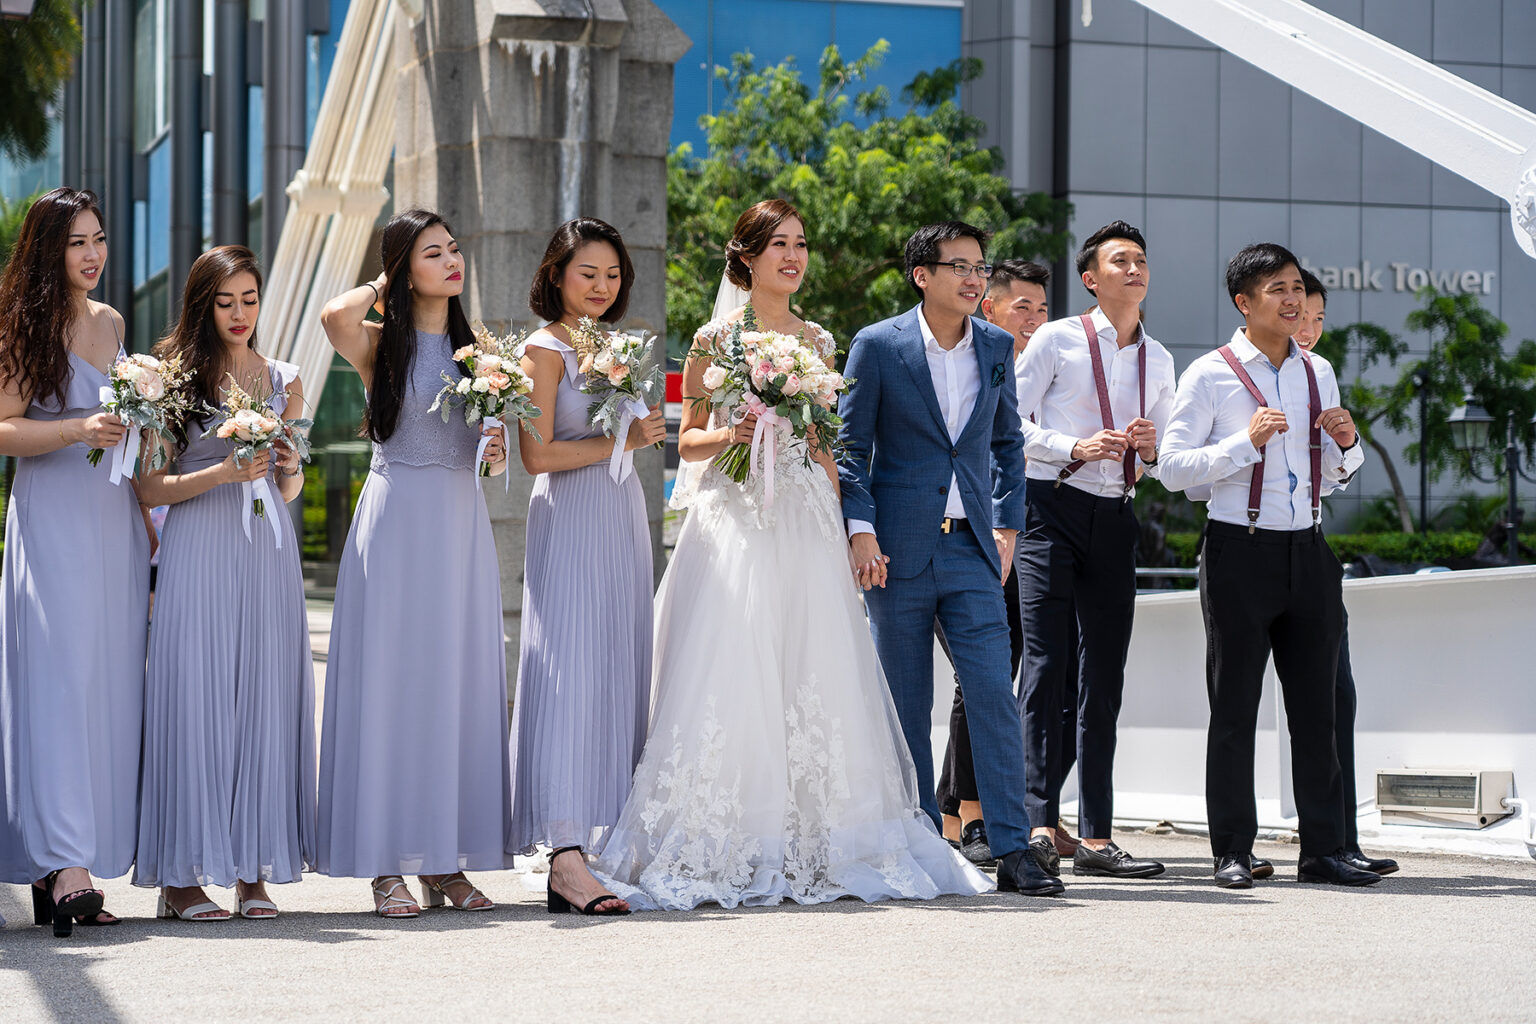 A wedding party posing for a photograph on a sunny day. Bridesmaids in lavender-colored dresses.